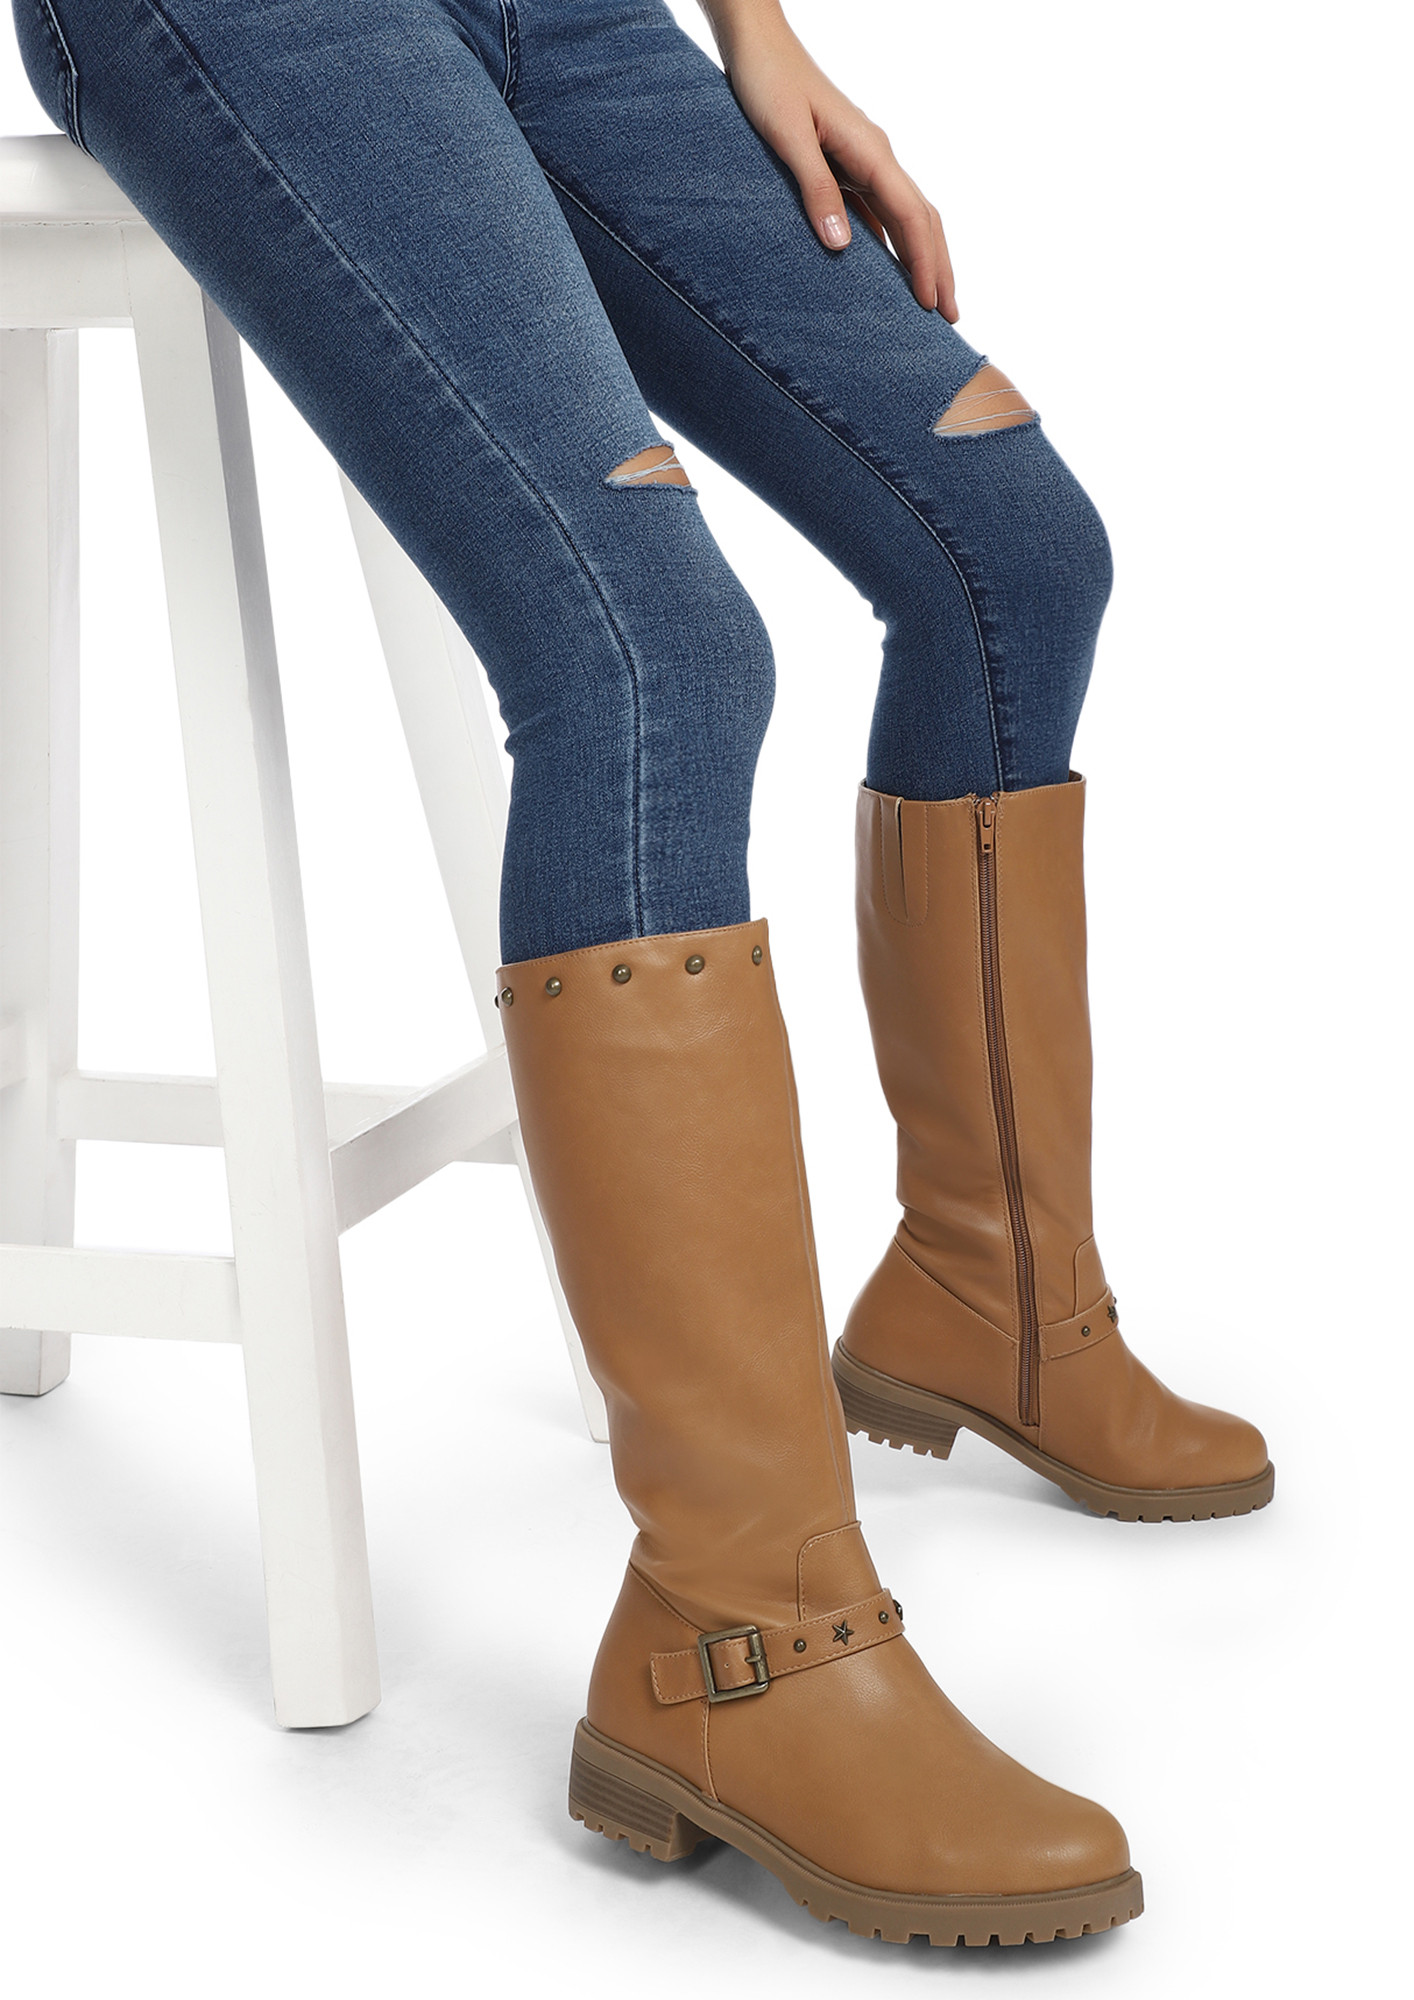 SUCH IS MY STYLE TAN MID-CALF BOOTS